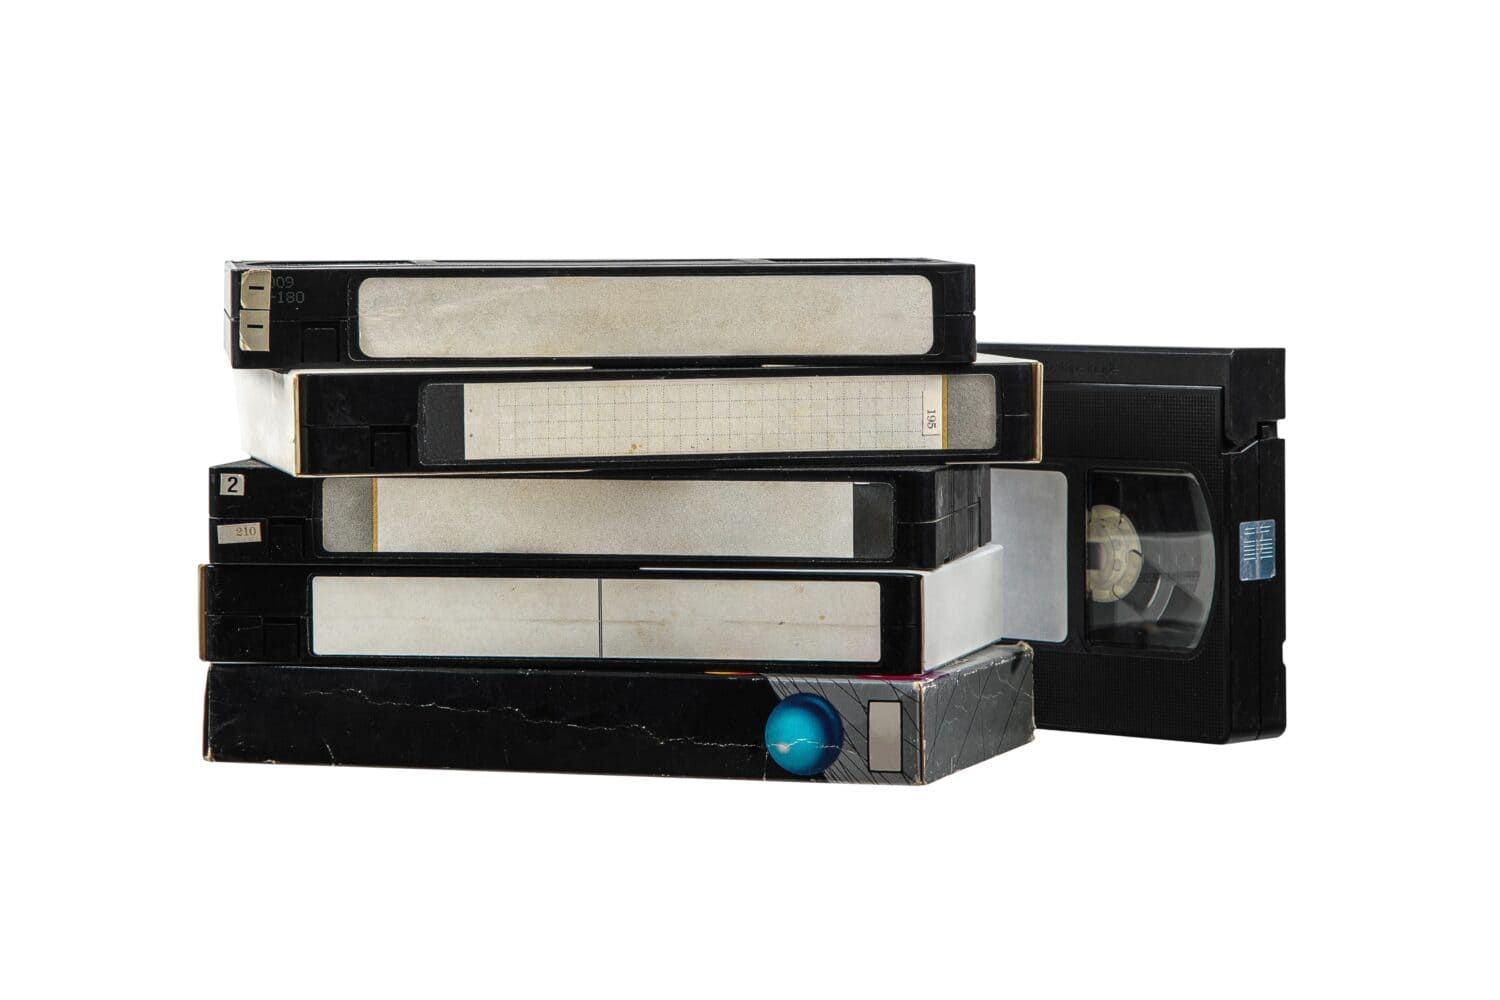 <p>While Betamax failed, VHS succeeded.</p>    <p>Despite Betamax's better quality, the lower price of the VHS and compatible VCR players led to a seriously unbeatable advantage over all the other competitors and their video cassette tapes. Consumers wanted affordable products more than they wanted high-quality tapes and players, and this can be seen in the VCR's continued relevance. The name VHS brings to mind an image that the name "Betamax" just doesn't for most.</p>    <p>Some have another theory as to why VHS triumphed over Betamax, and it's just crazy enough to be believed (even if it is a little… mature).</p><p><span>Would you please let us know what you think about our content? <p>Agree? Tell us by clicking the “Thumbs Up” button above.</p> Disagree? Leave a comment telling us what you’d change.</span></p>